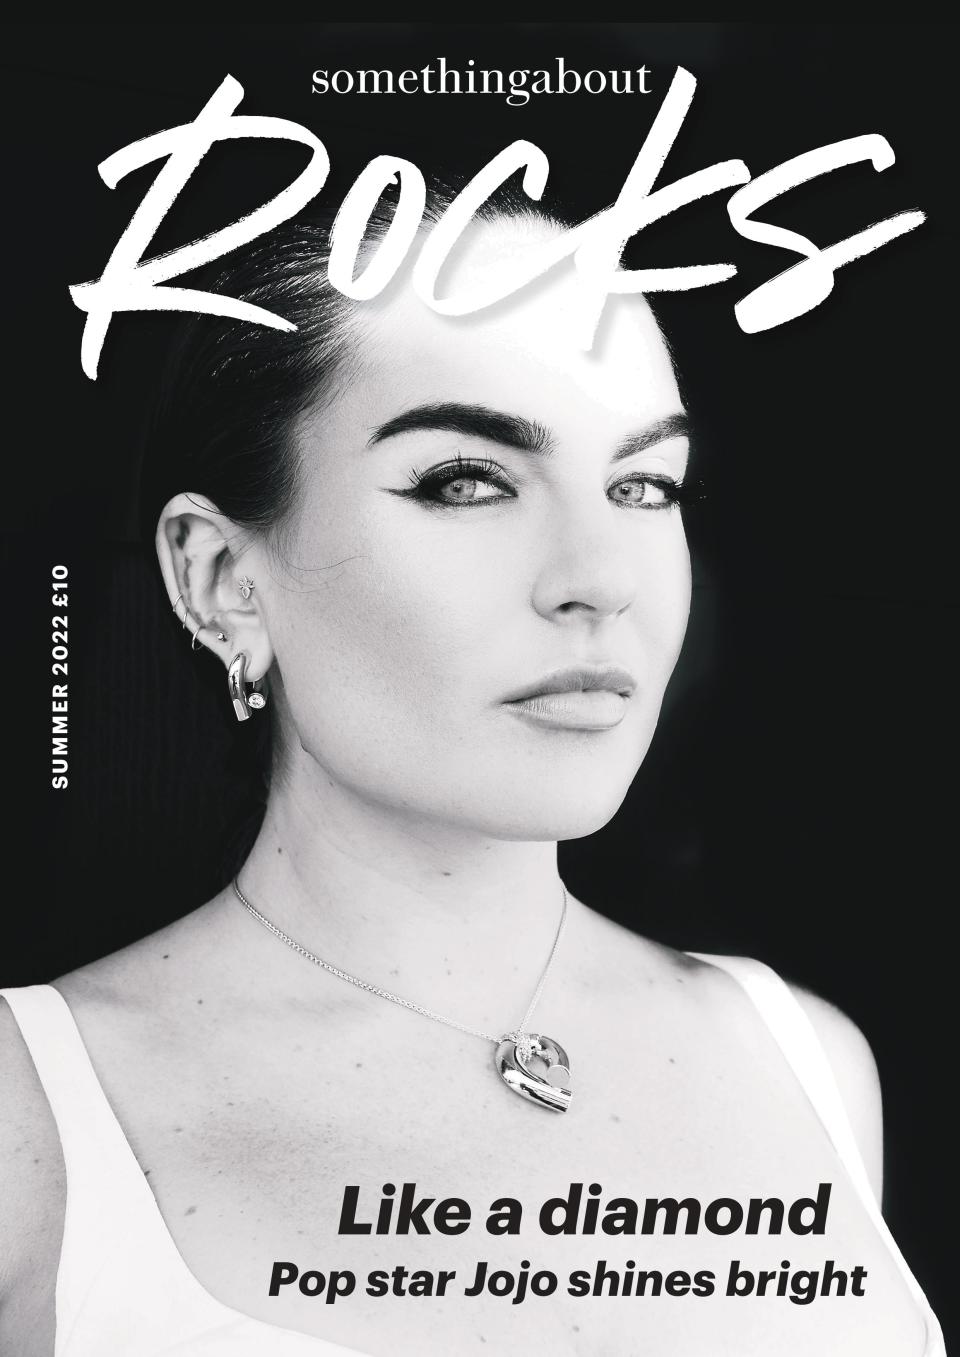 JoJo fronts the debut issue of the jewelry magazine “Something About Rocks.” - Credit: Courtesy image